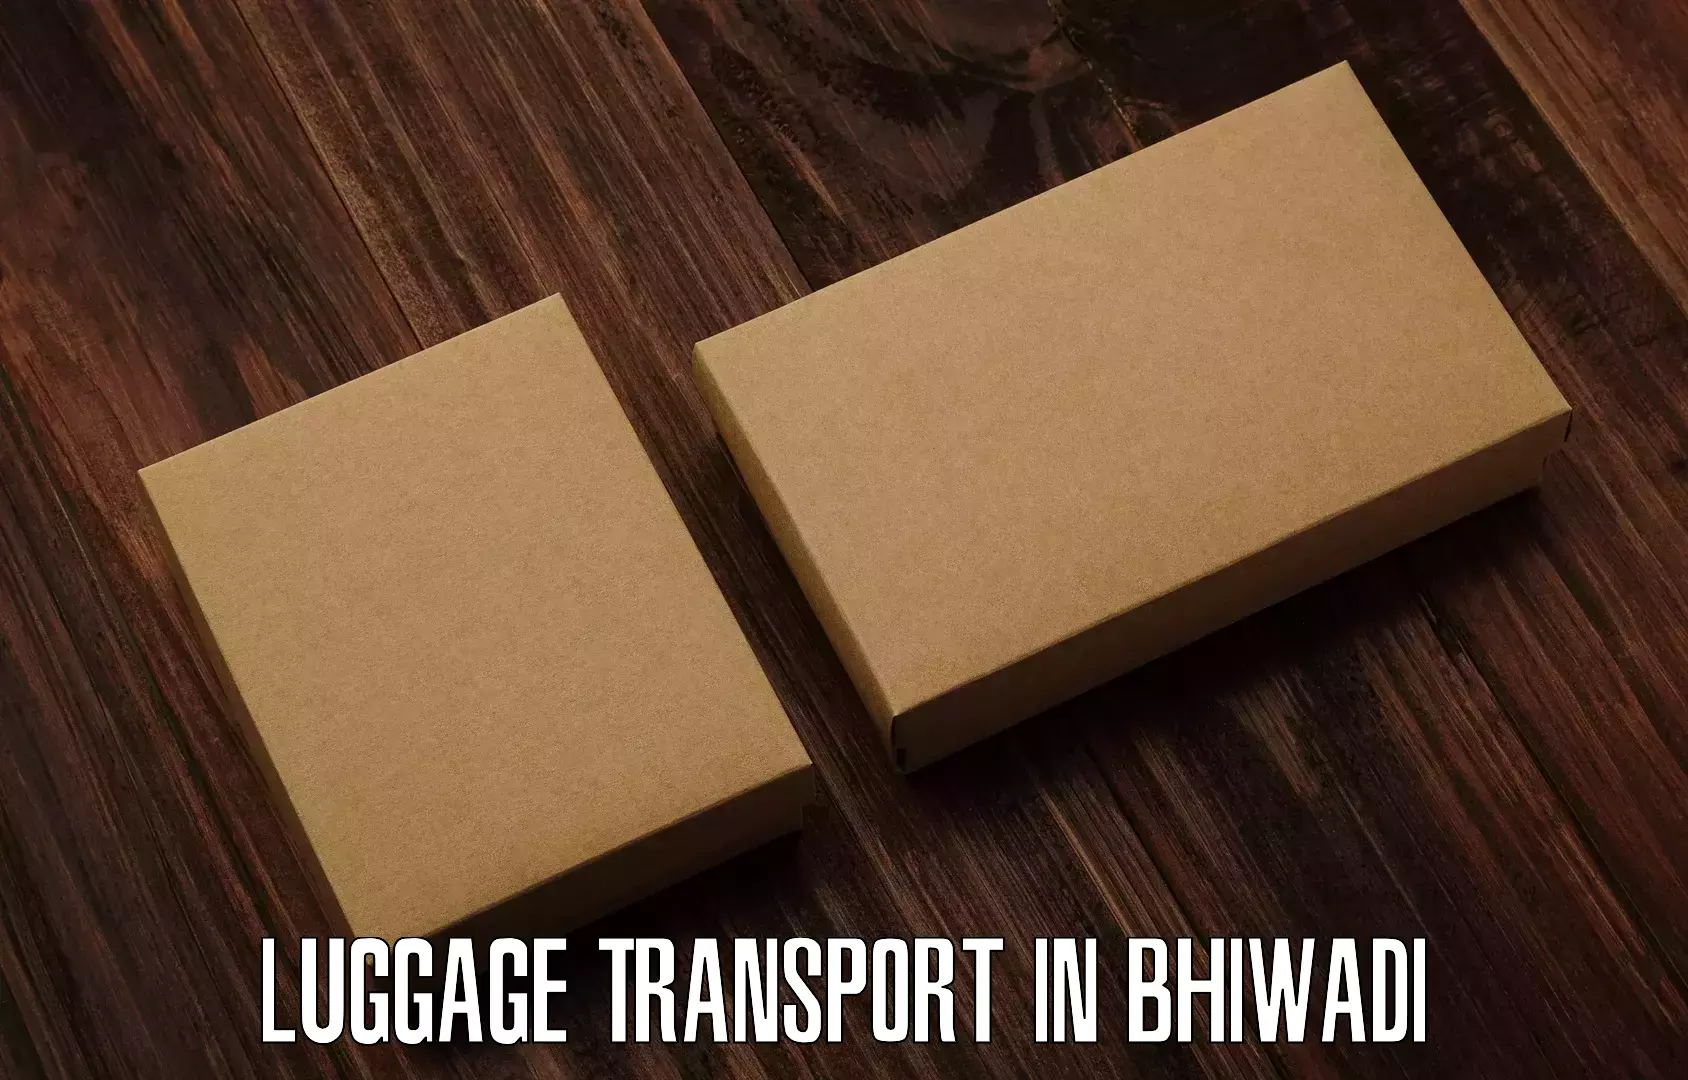 Baggage transport services in Bhiwadi